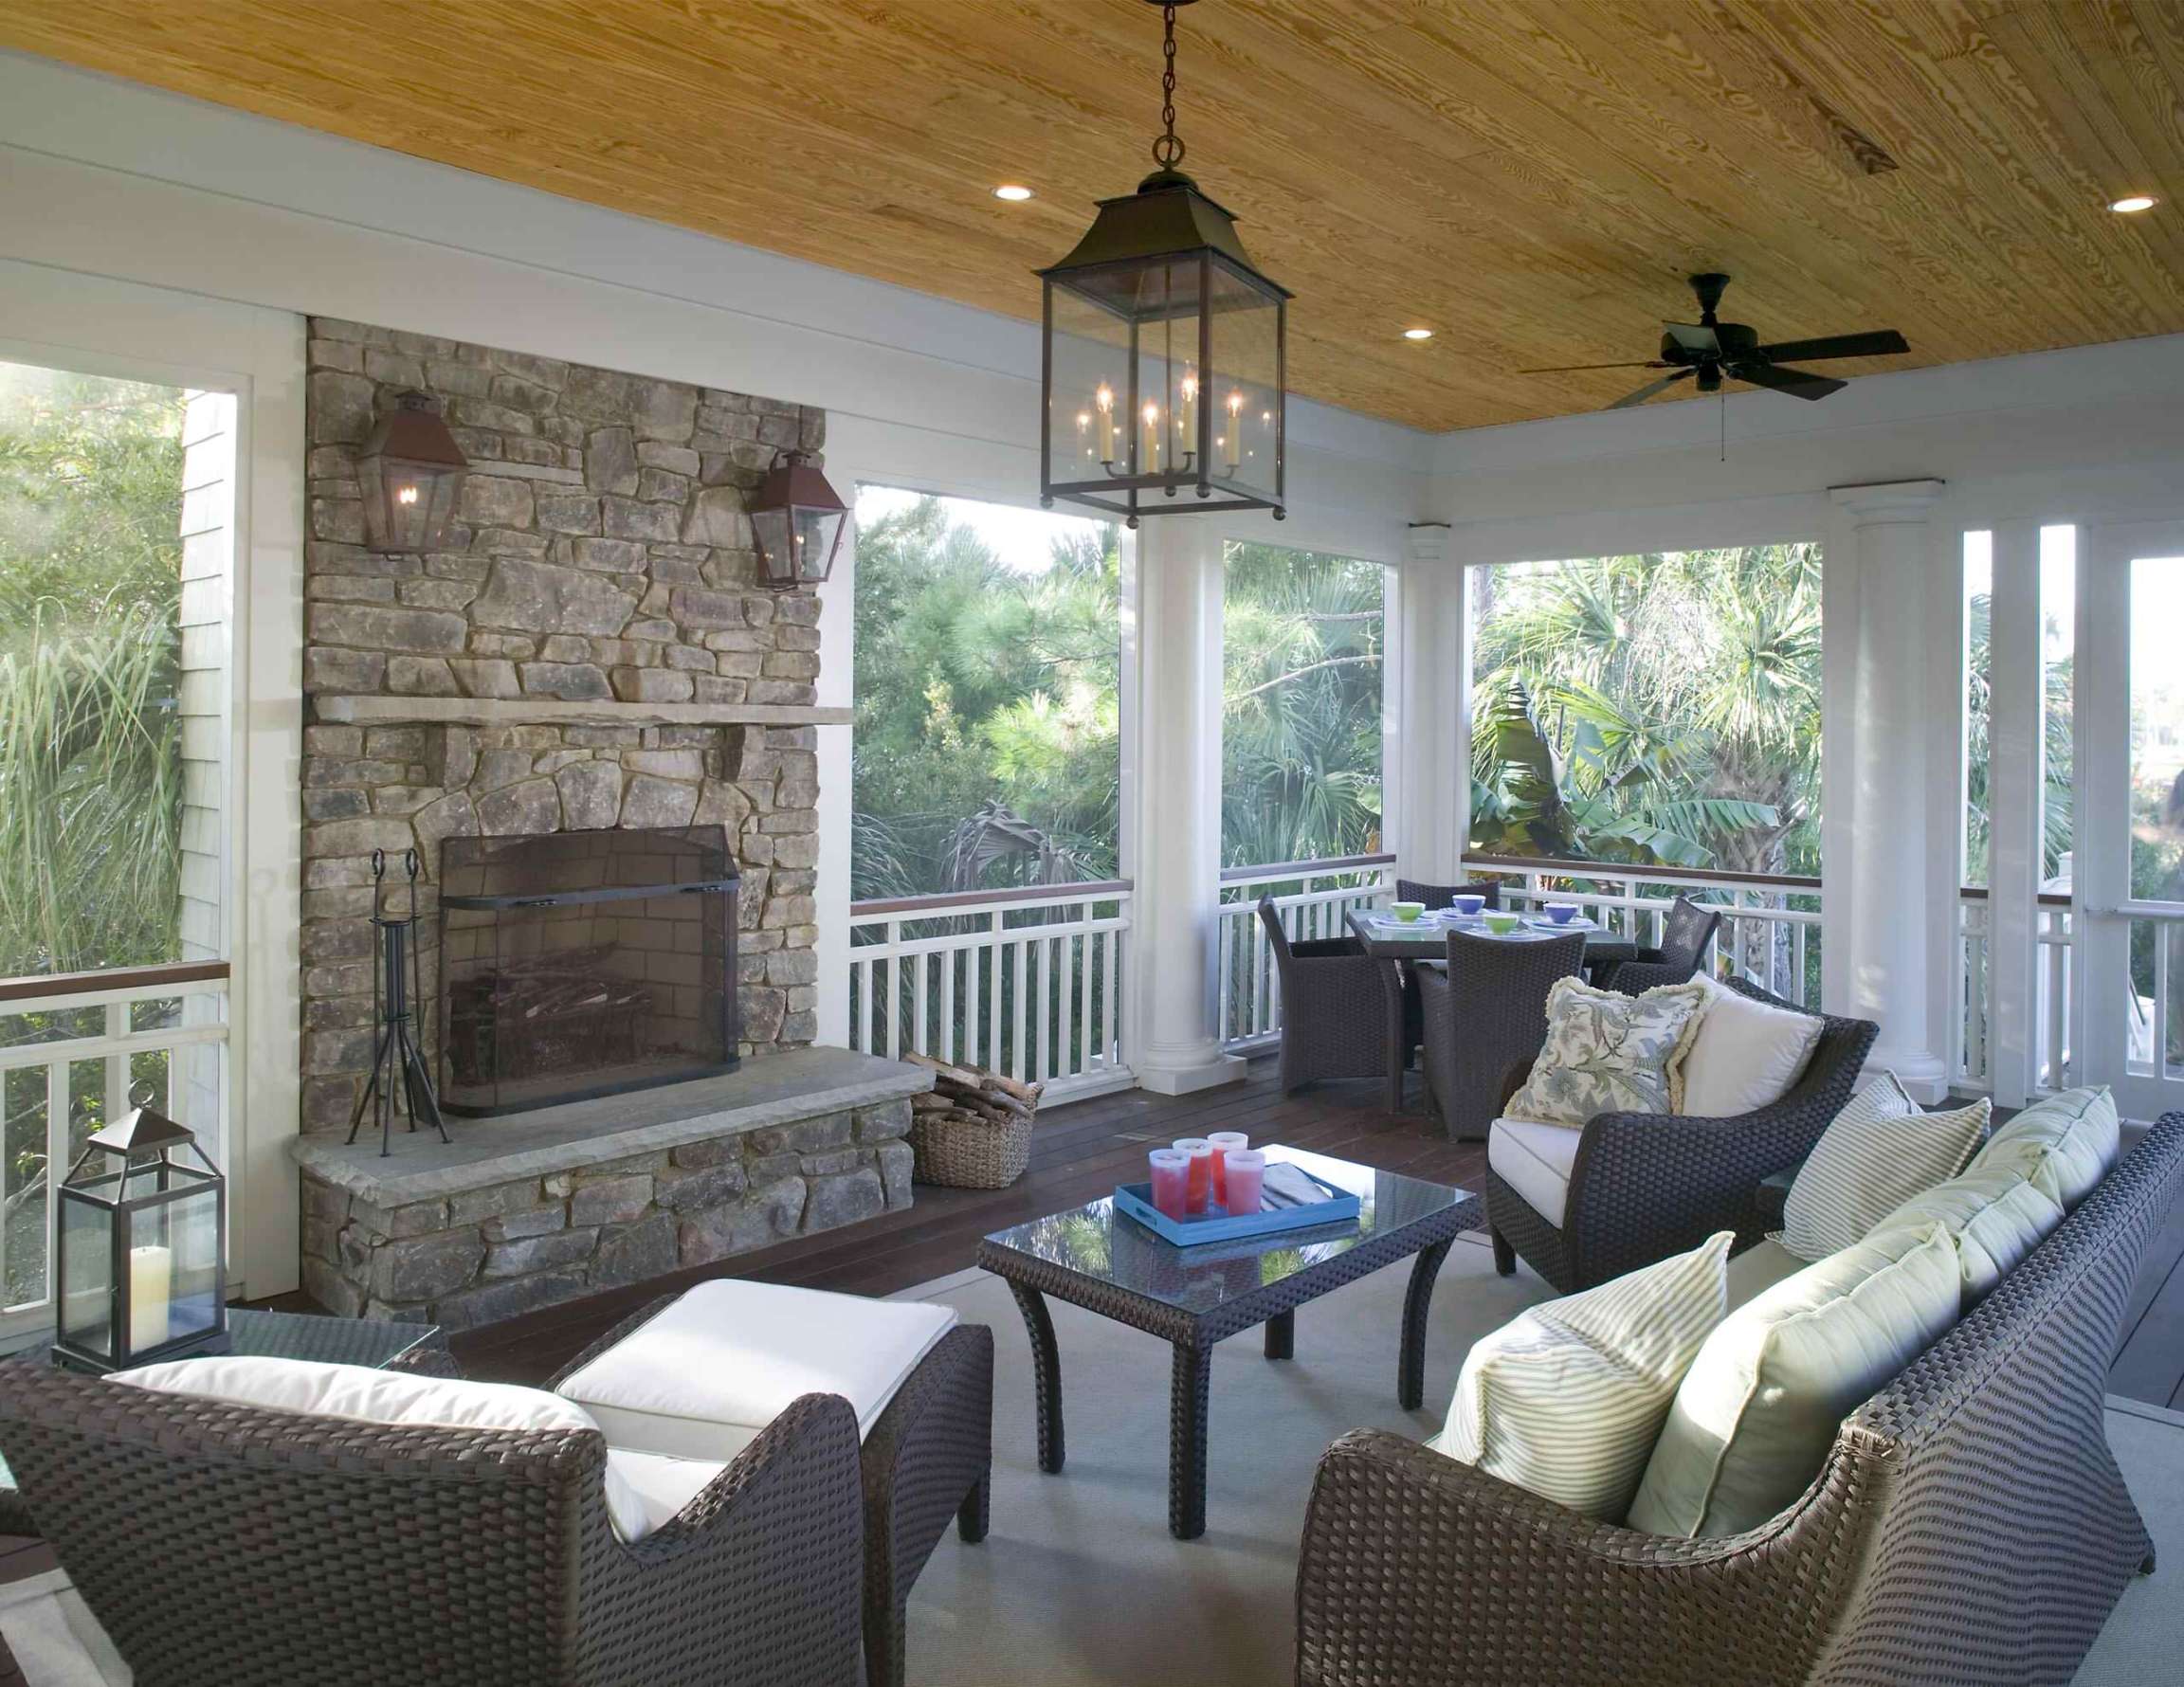 Covered Porch With Fireplace - Photos & Ideas  Houzz